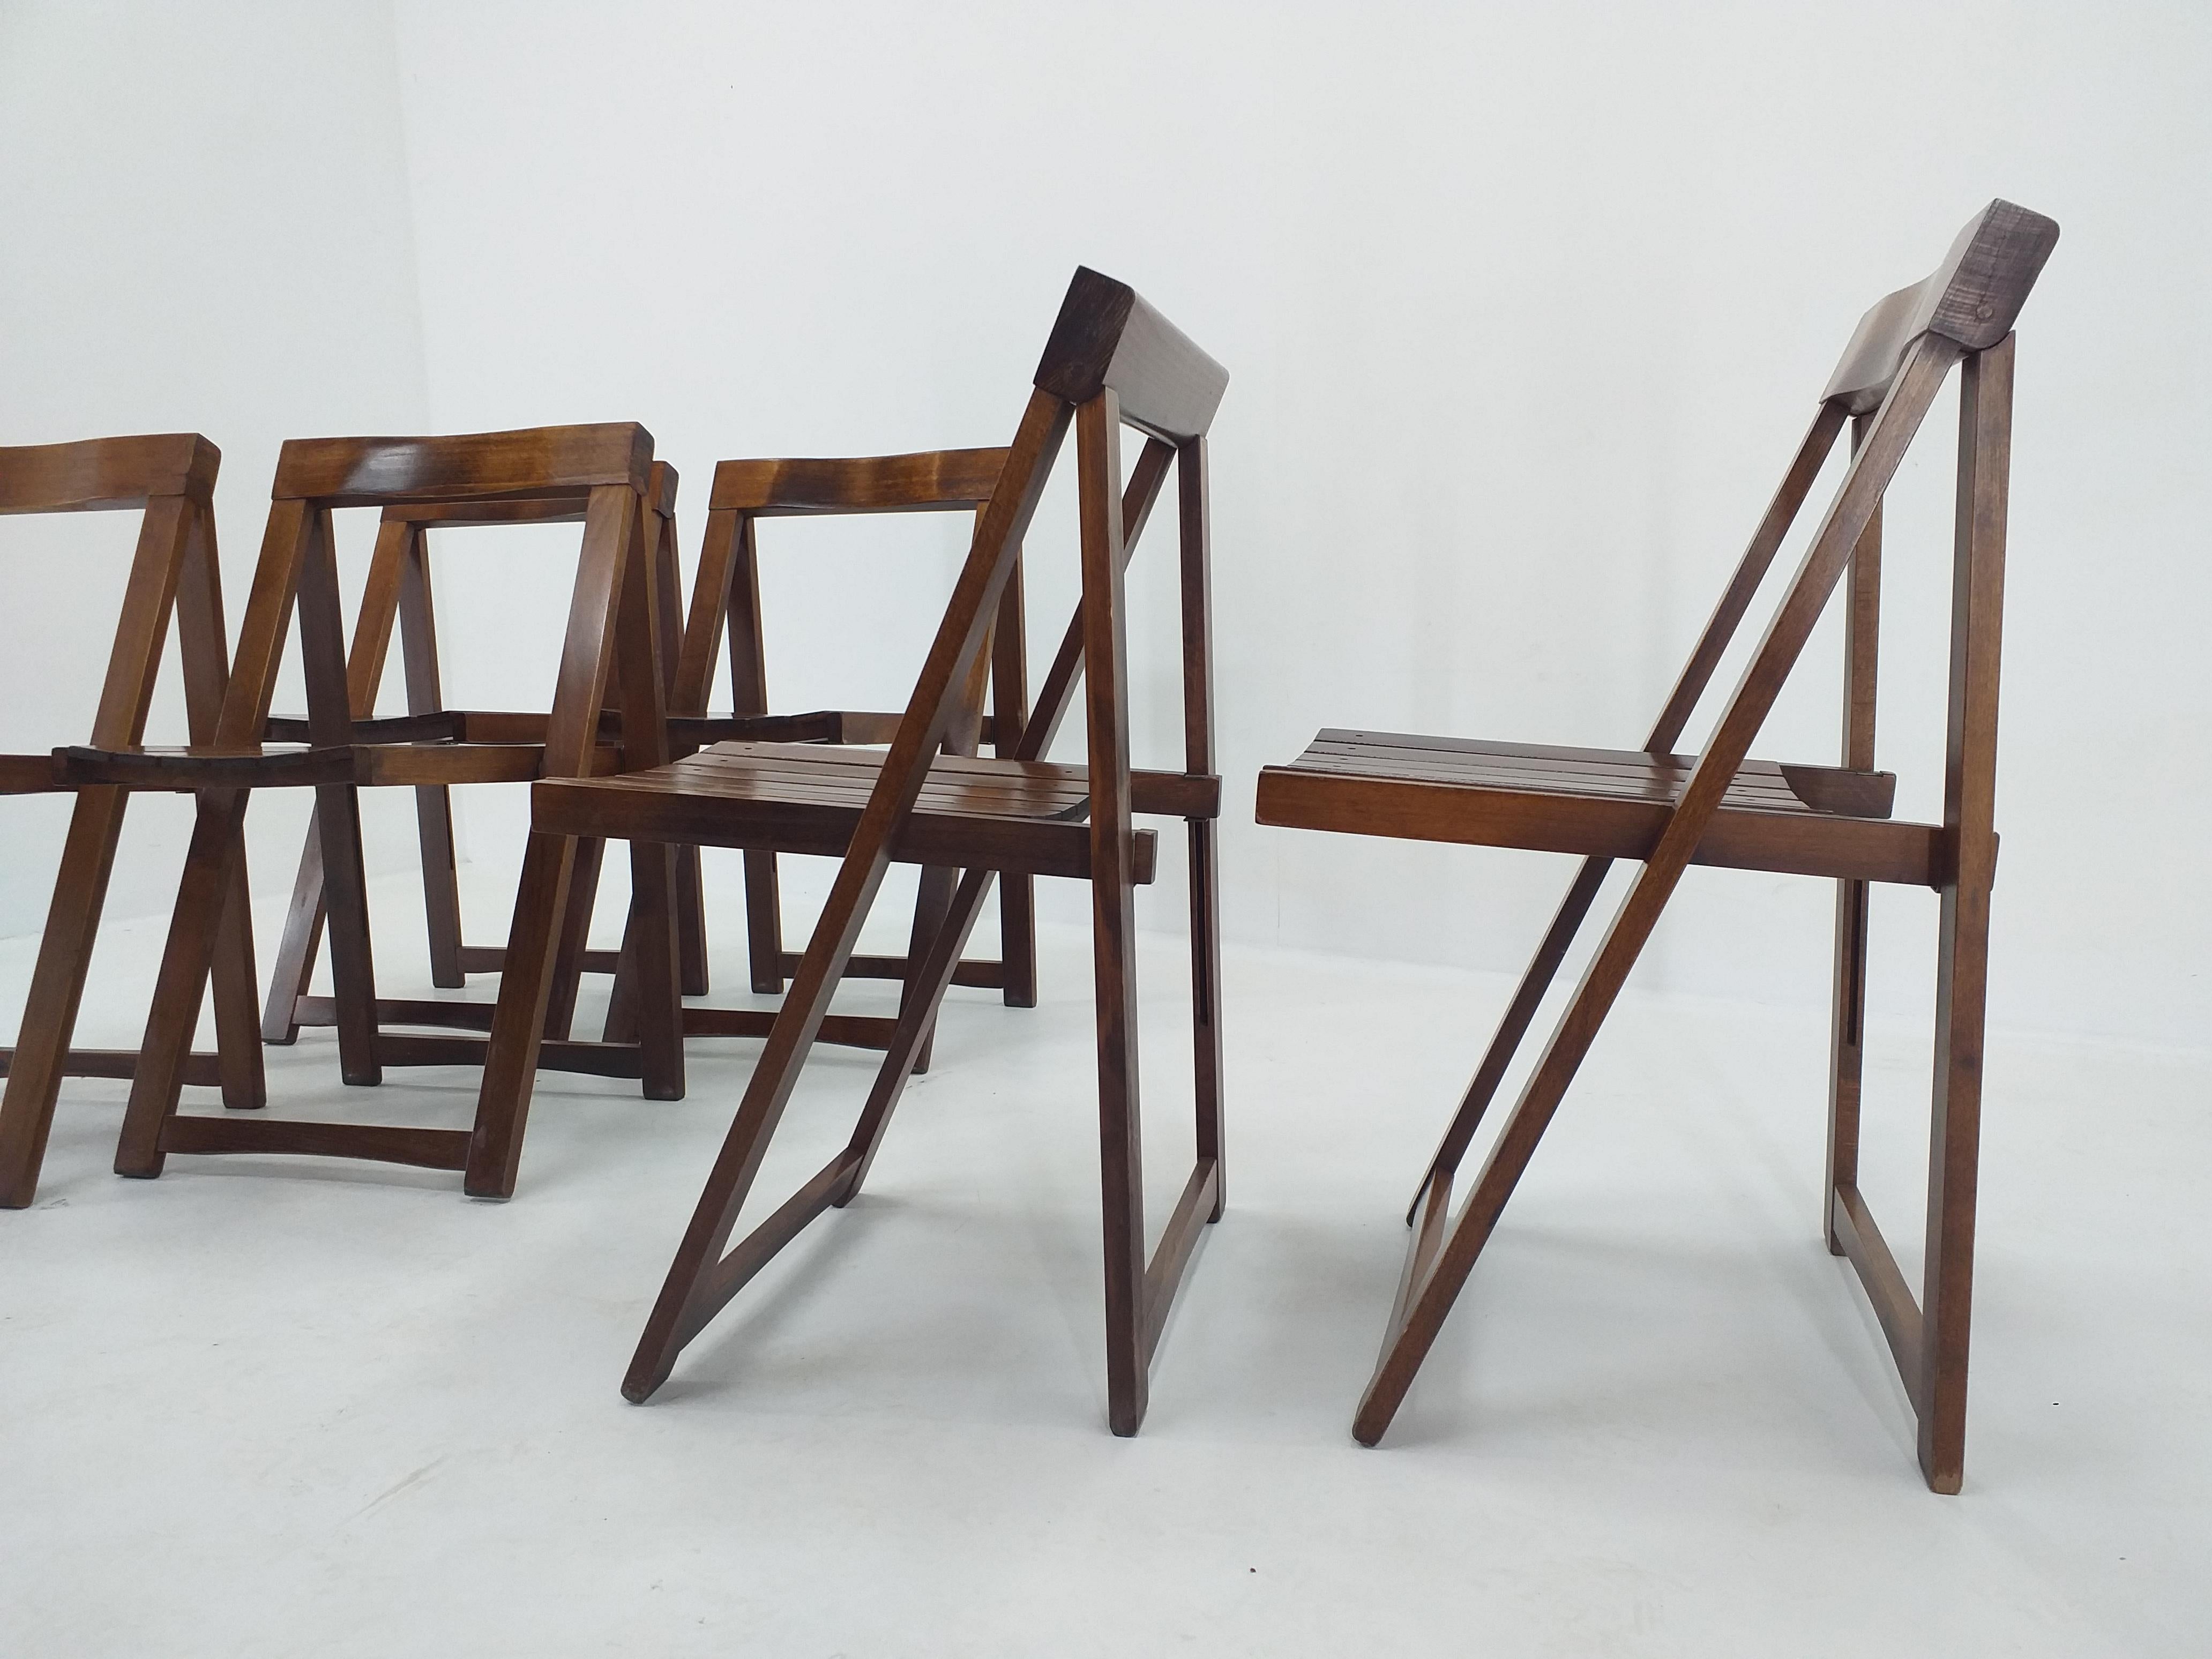 Set of Six Mid Century Folding Chairs Aldo Jacober for Alberto Bazzani, 1960s For Sale 4